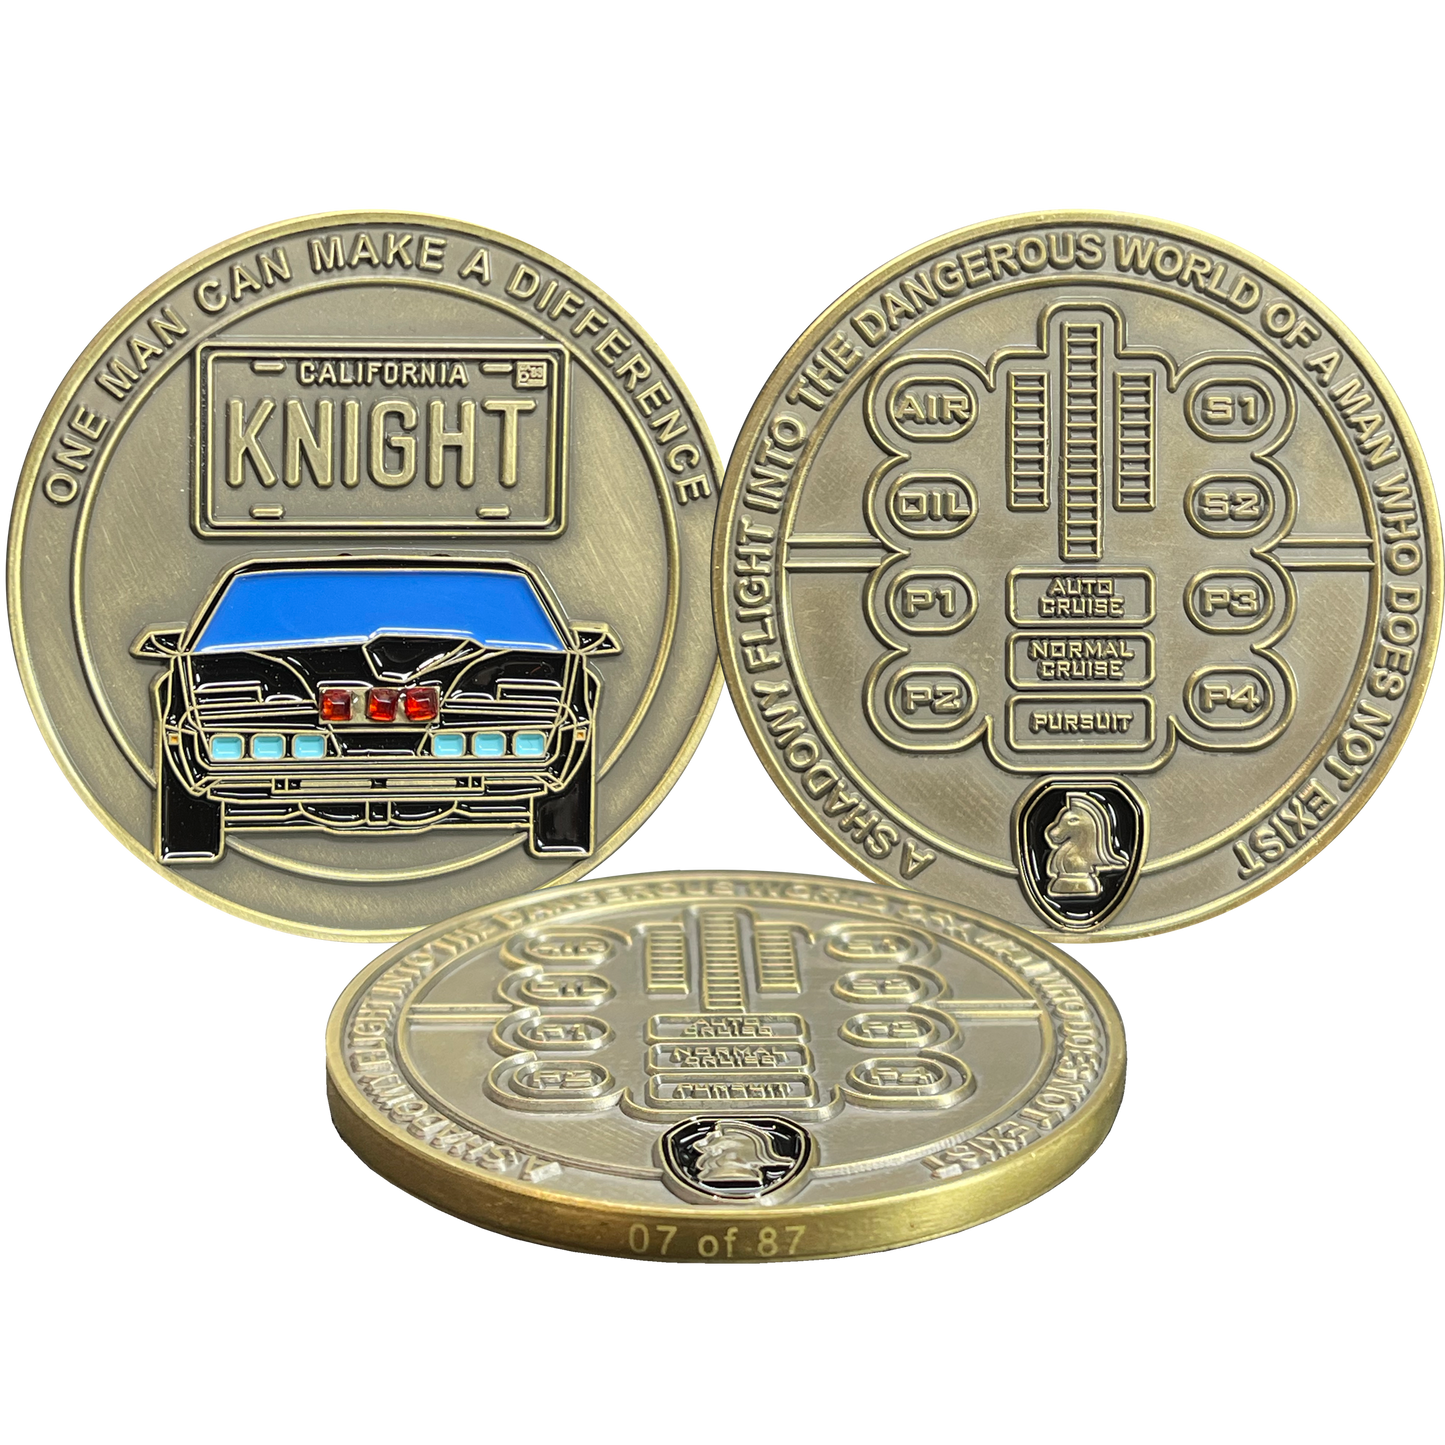 BL13-008 Knight Rider license plate KITT voice box Challenge Coin with serial number